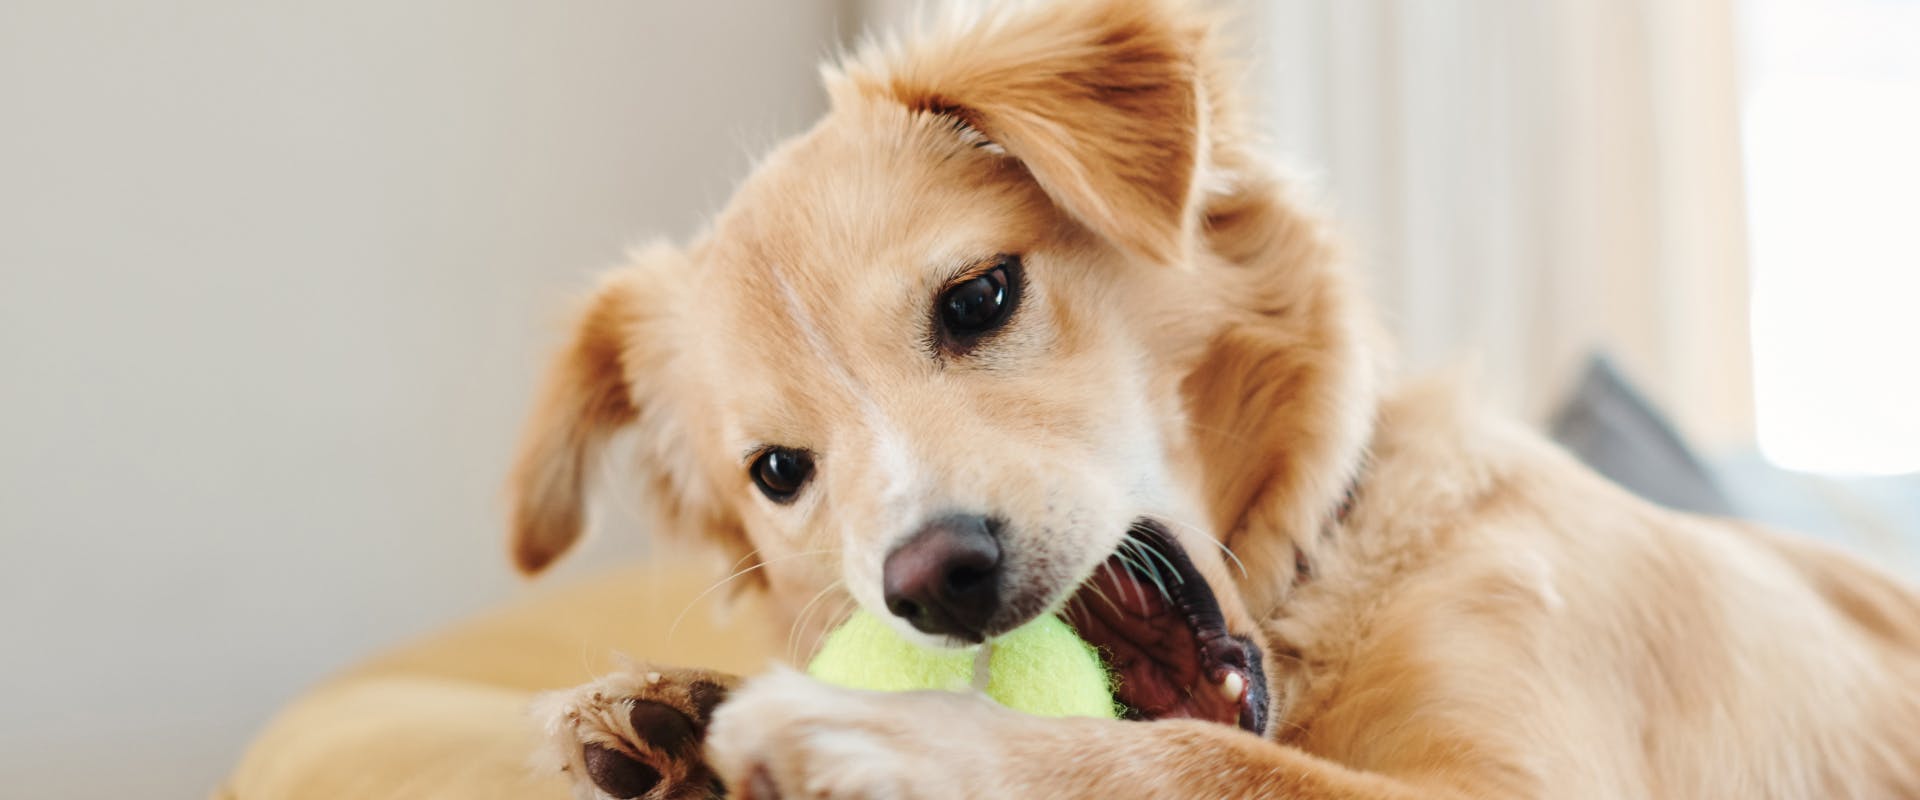 a puppy chewing on tennis ball to distract it whilst the dog is home alone